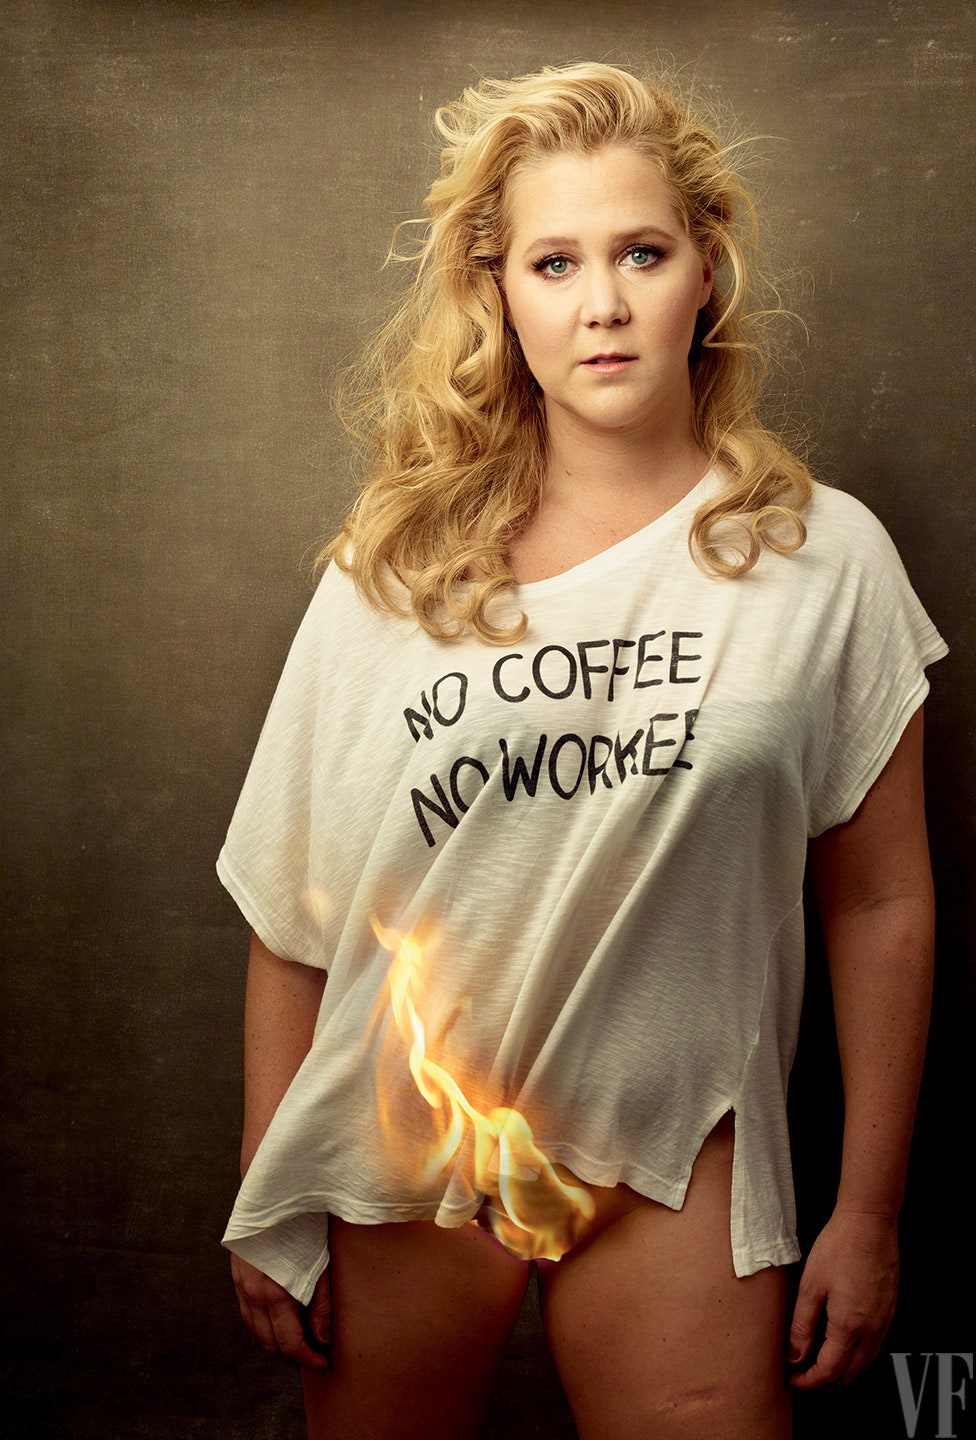 amy-schumer-may-2016-cover-vf-03